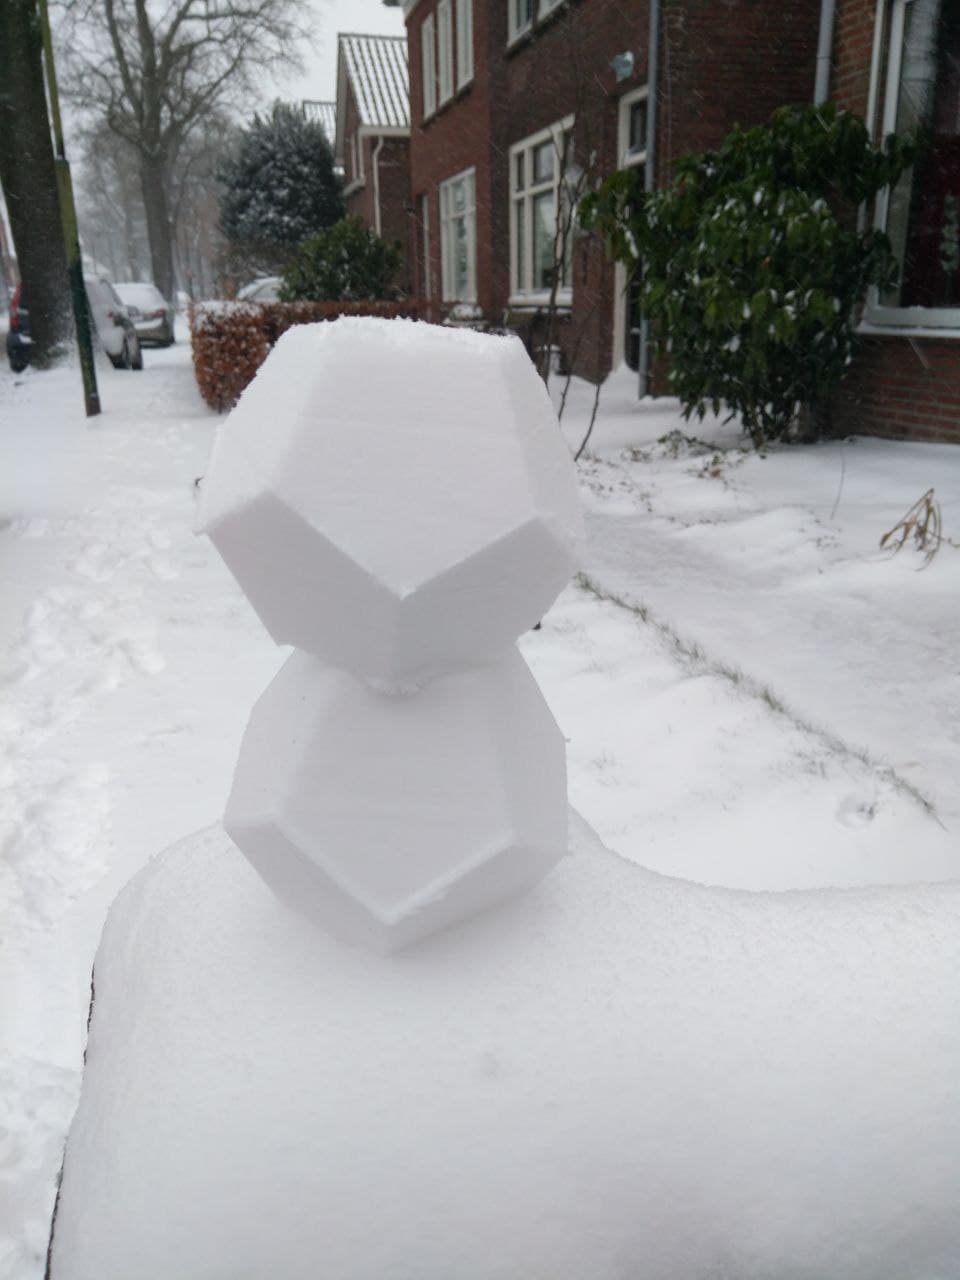 Dodecahedron snowball maker